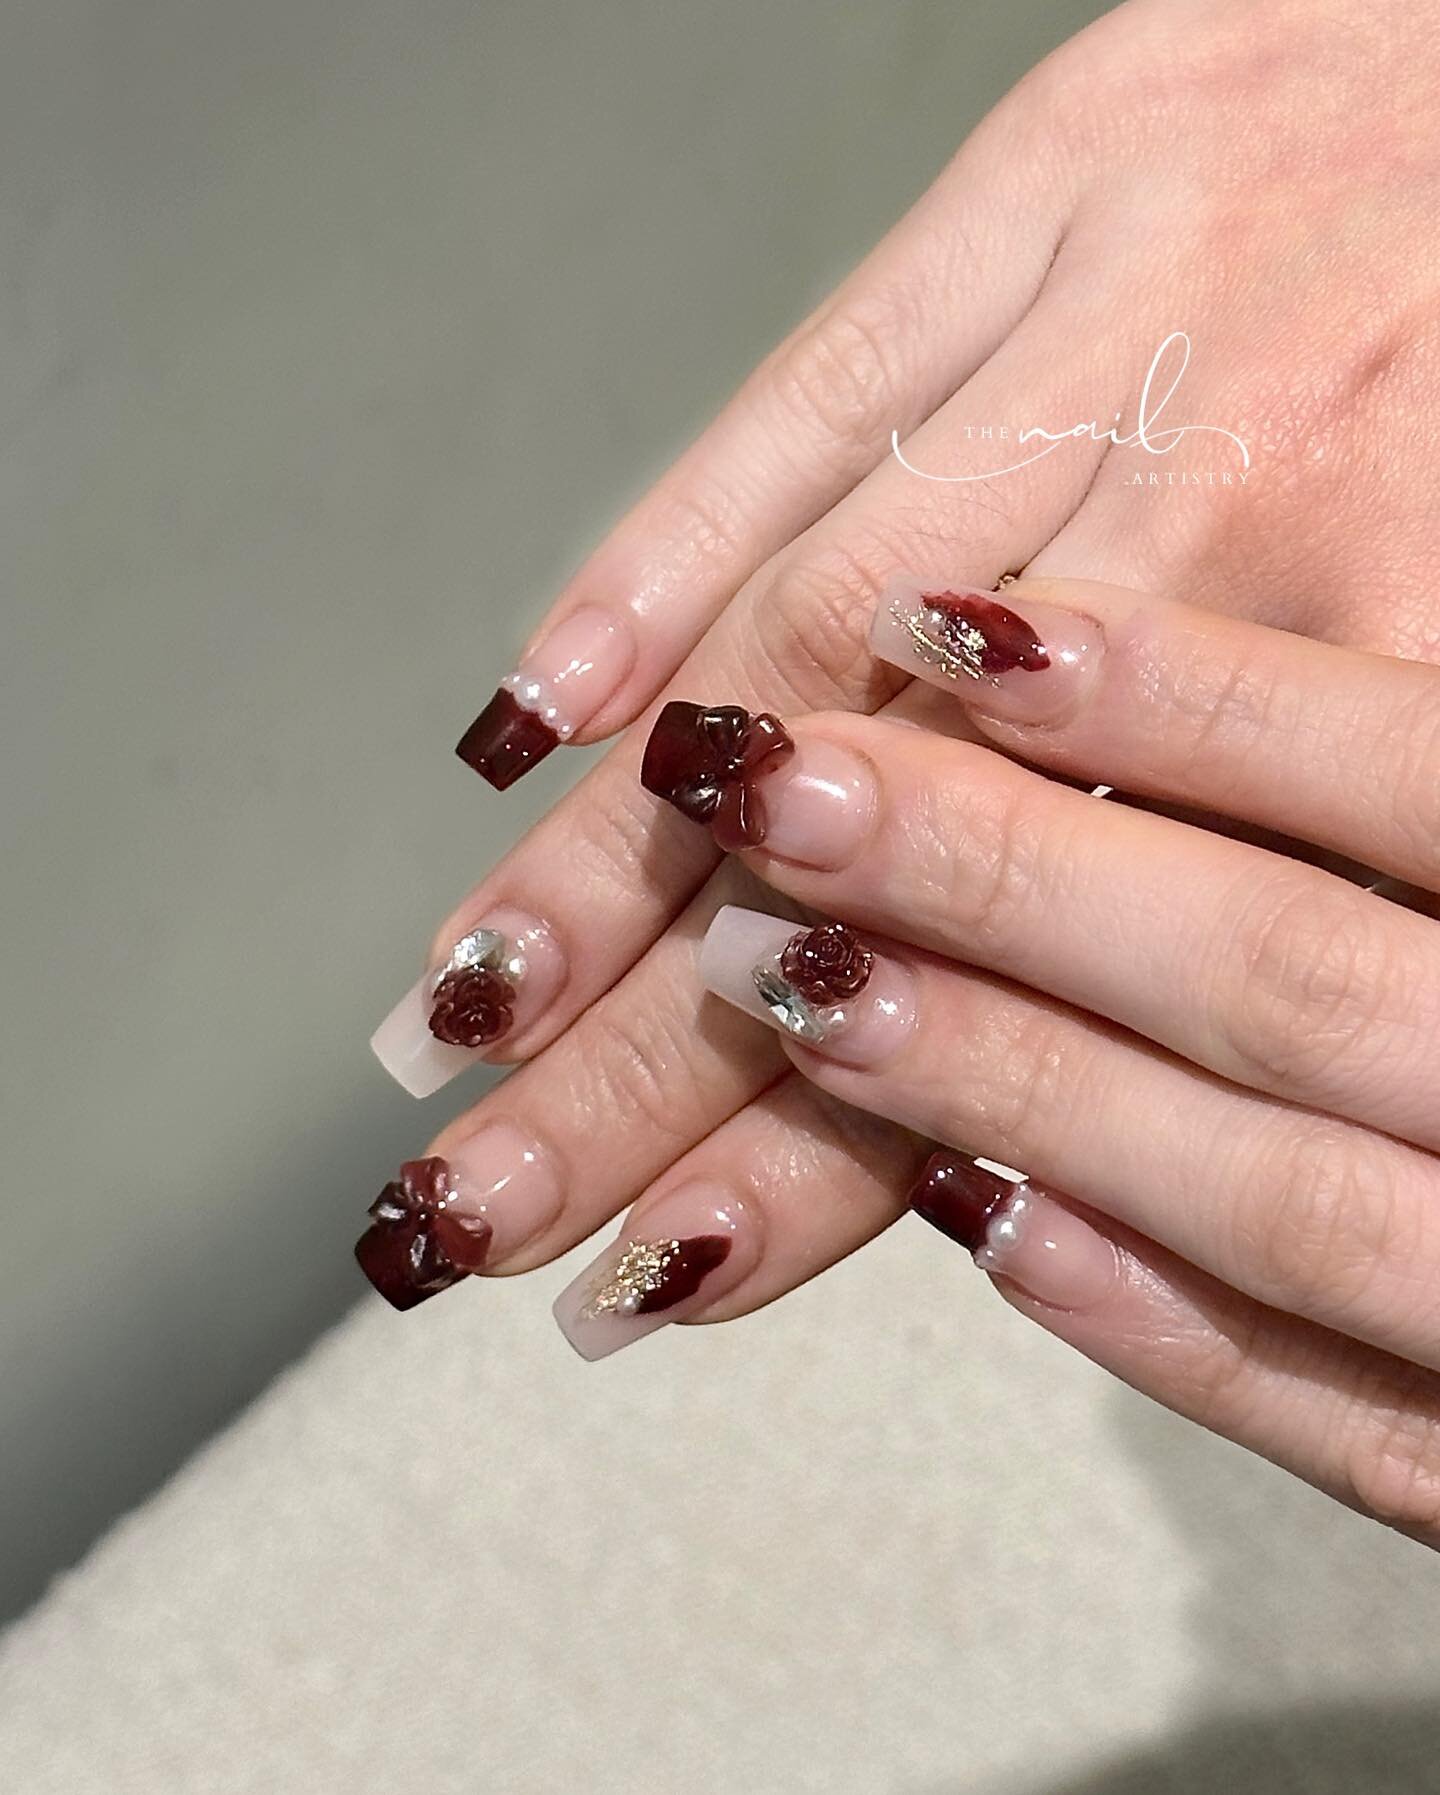 Falling in love ✨❤️

🫶🏻 this set was made for CNY &amp; Valentines 💌 but you can have this done cuz it is very pretty in real life 🥰😍
📲 To book with us - Link in bio /Walk-in welcome 
☎️ 020 7018 6636
.
.
.
.
.
#nails #douyinnails #valentinenai